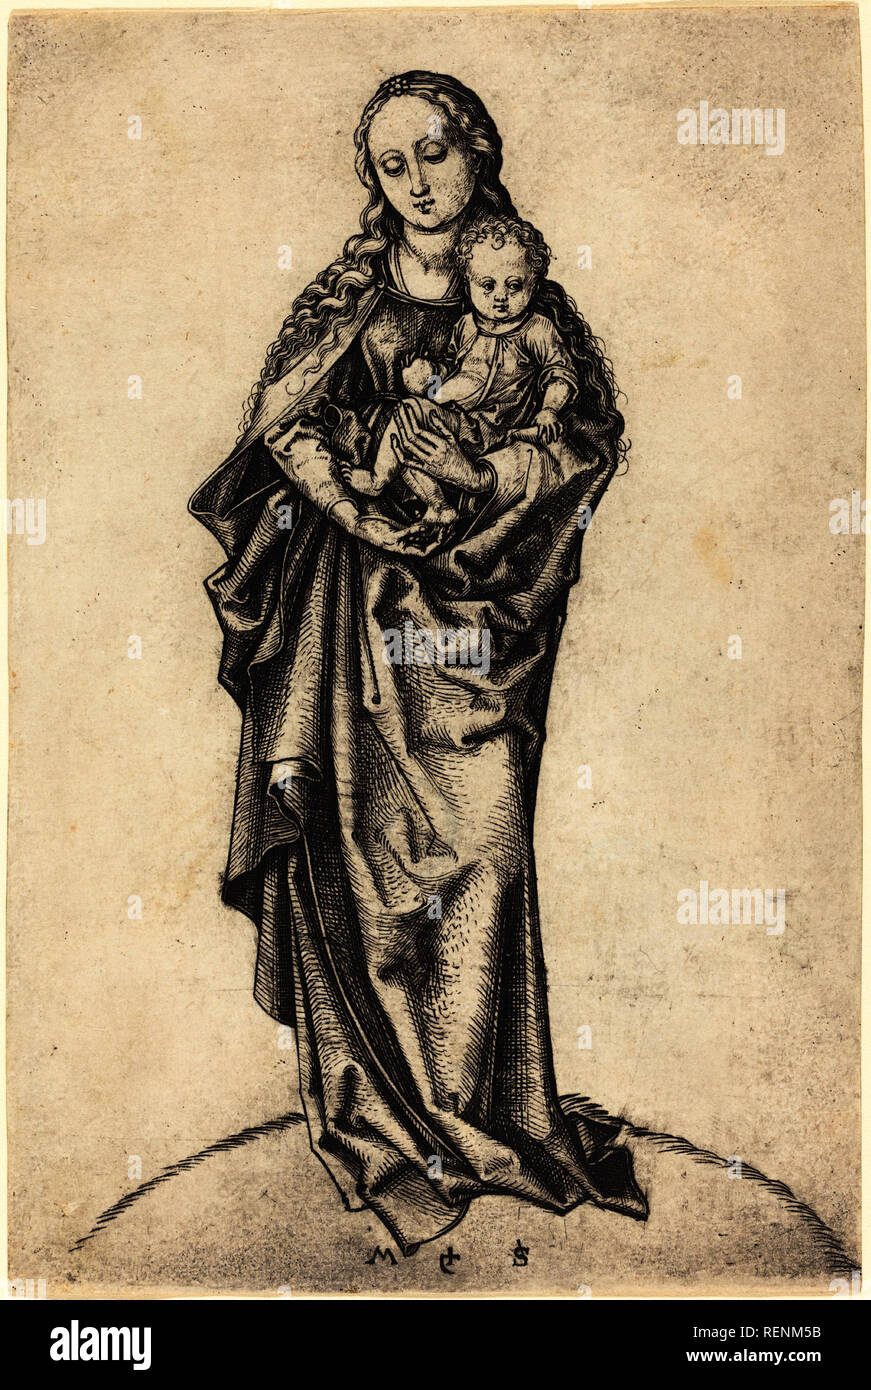 Virgin and Child with the Apple. Dated: c. 1470/1475. Medium: engraving. Museum: National Gallery of Art, Washington DC. Author: Martin Schongauer. Stock Photo